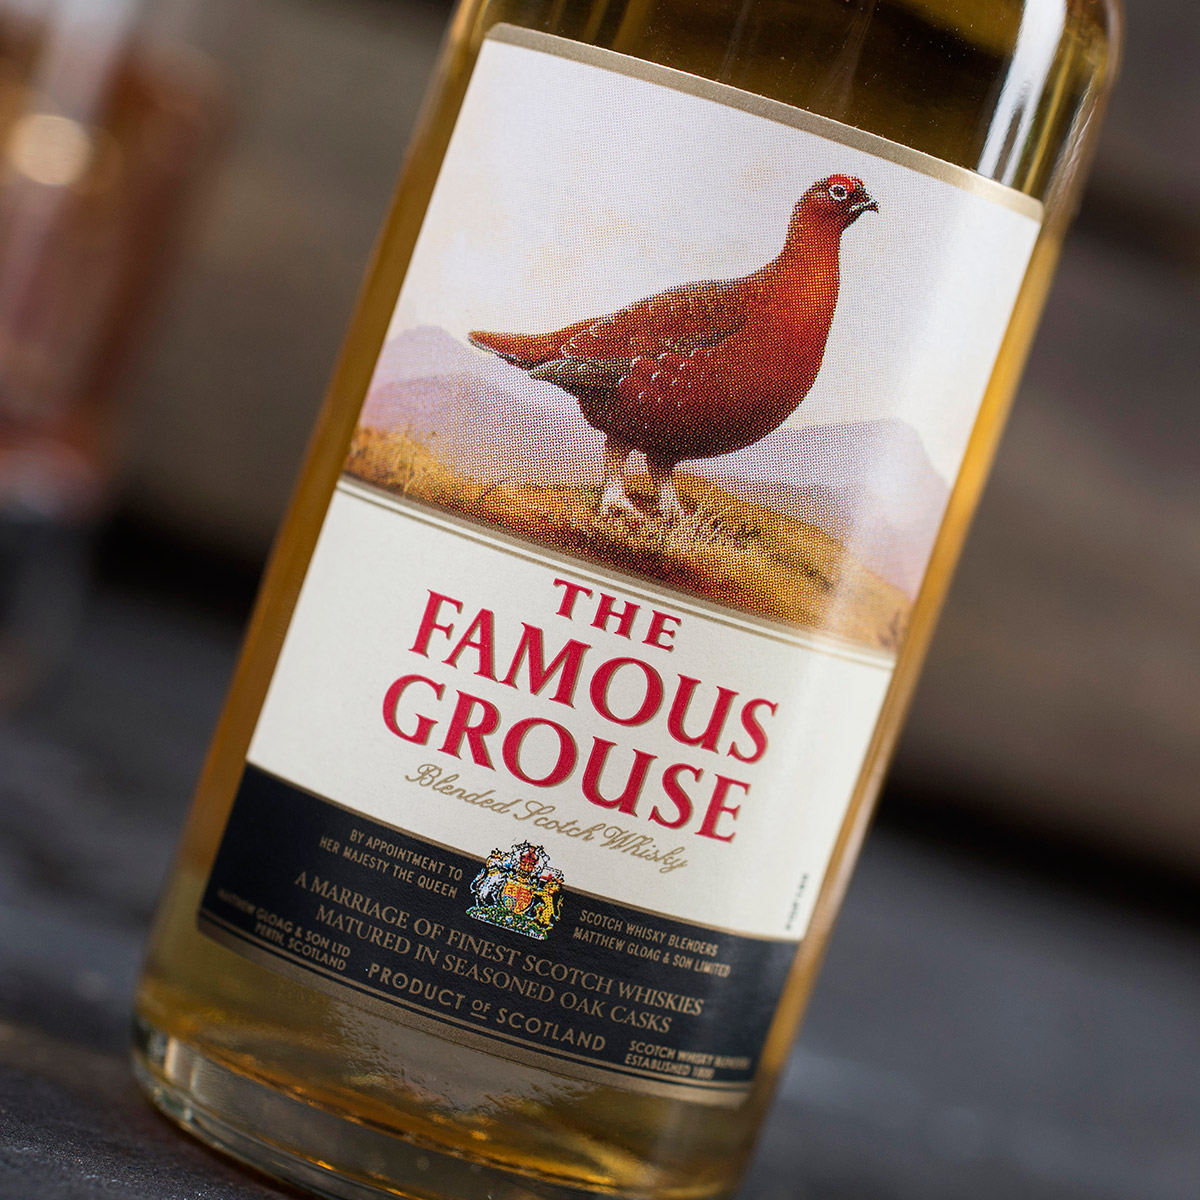 Personalised Stern Whisky Tumbler and Famous Grouse Miniature - World's Best